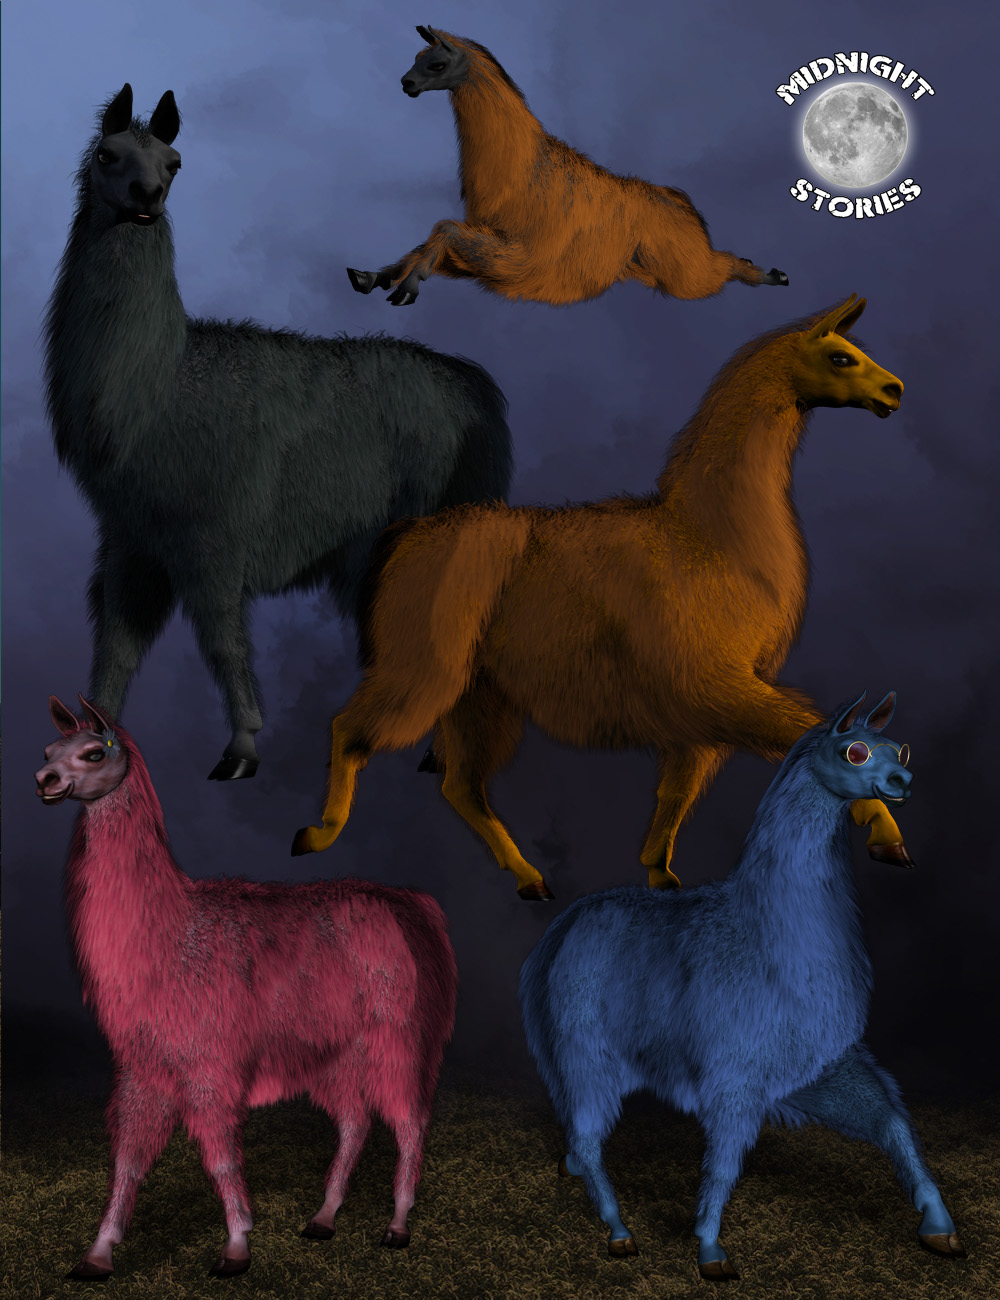 Lovable Llamas by: midnight_stories, 3D Models by Daz 3D